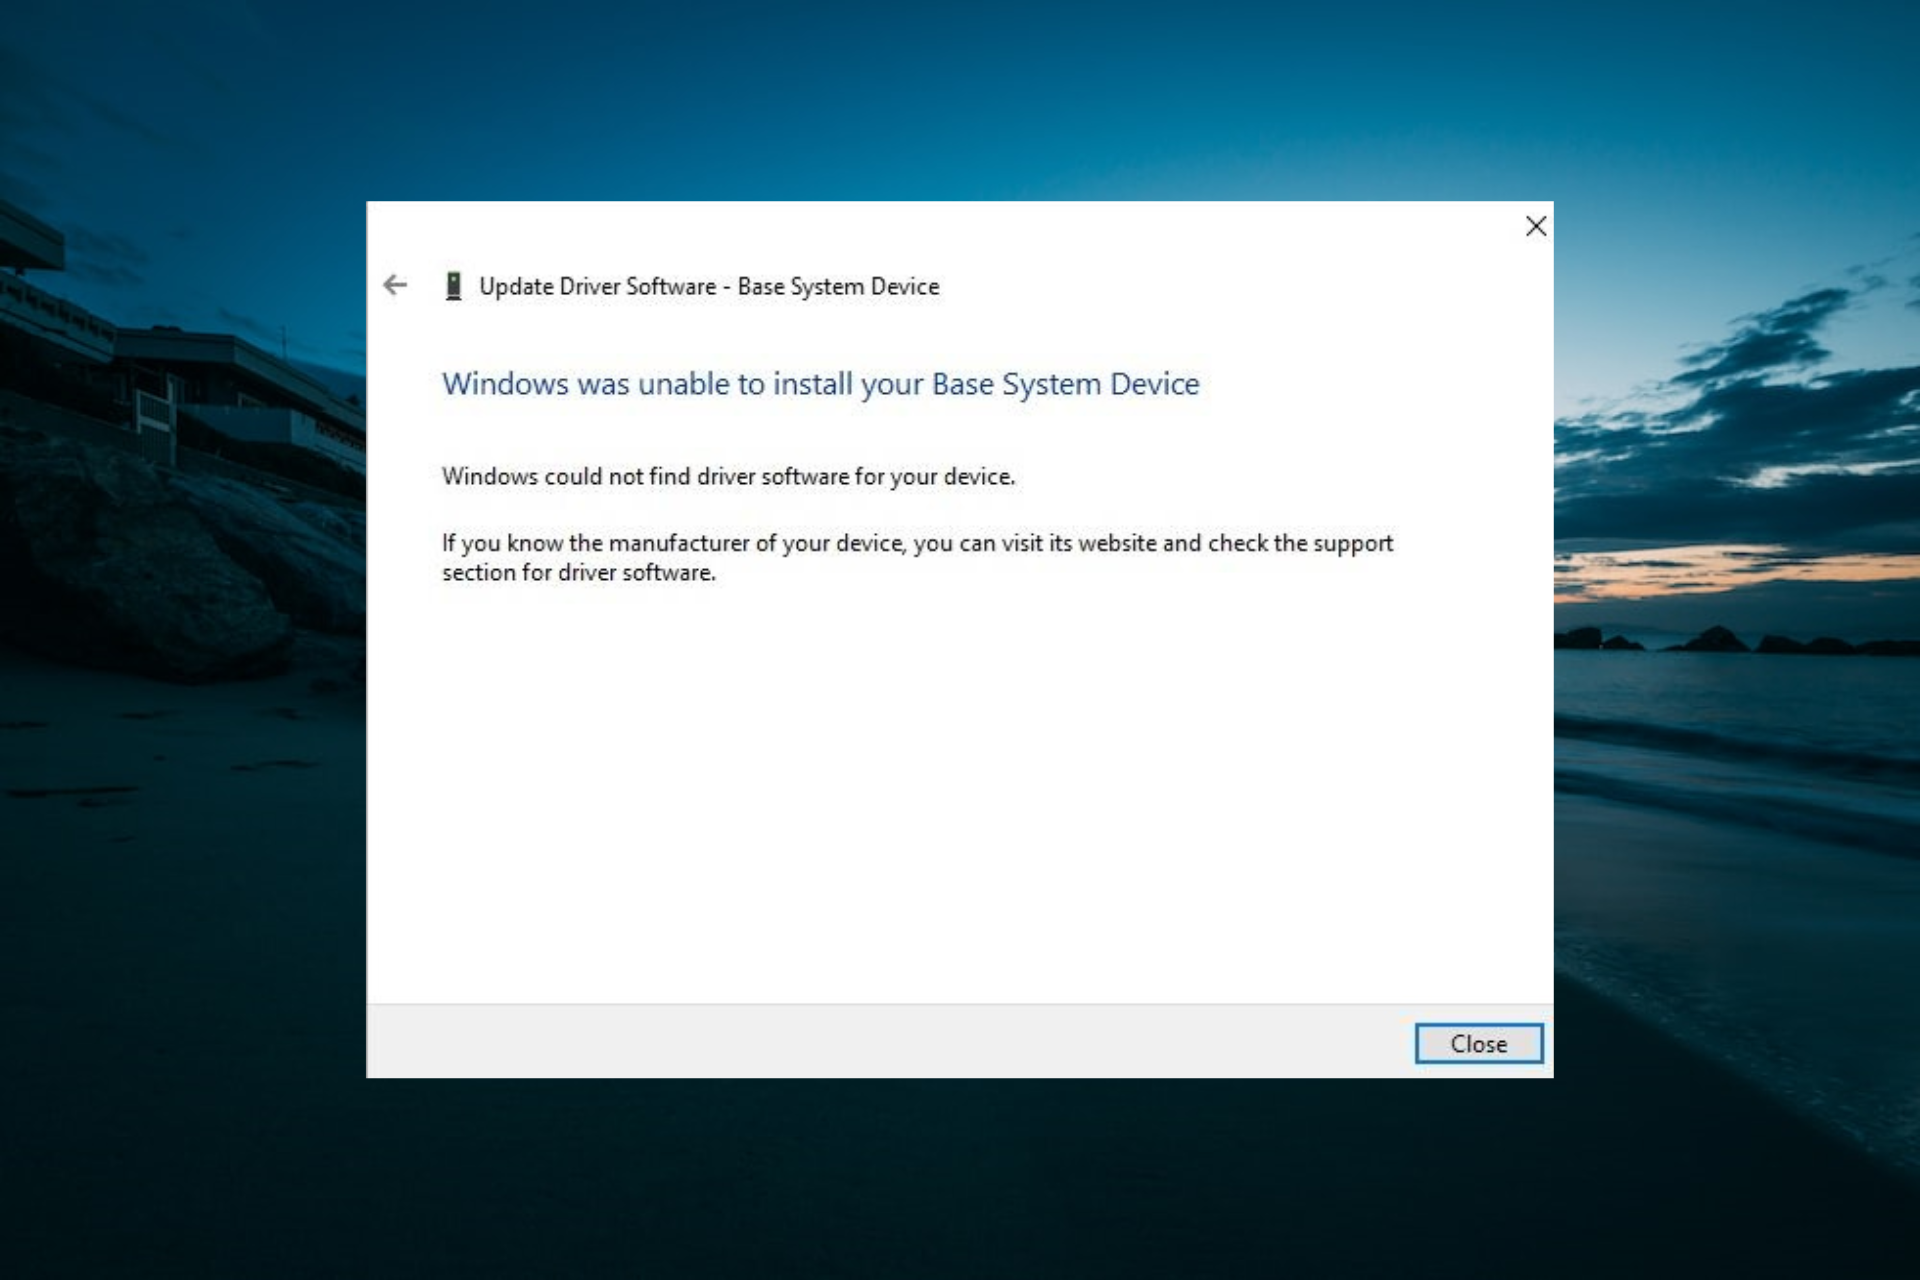 windows was unable to install your base system device